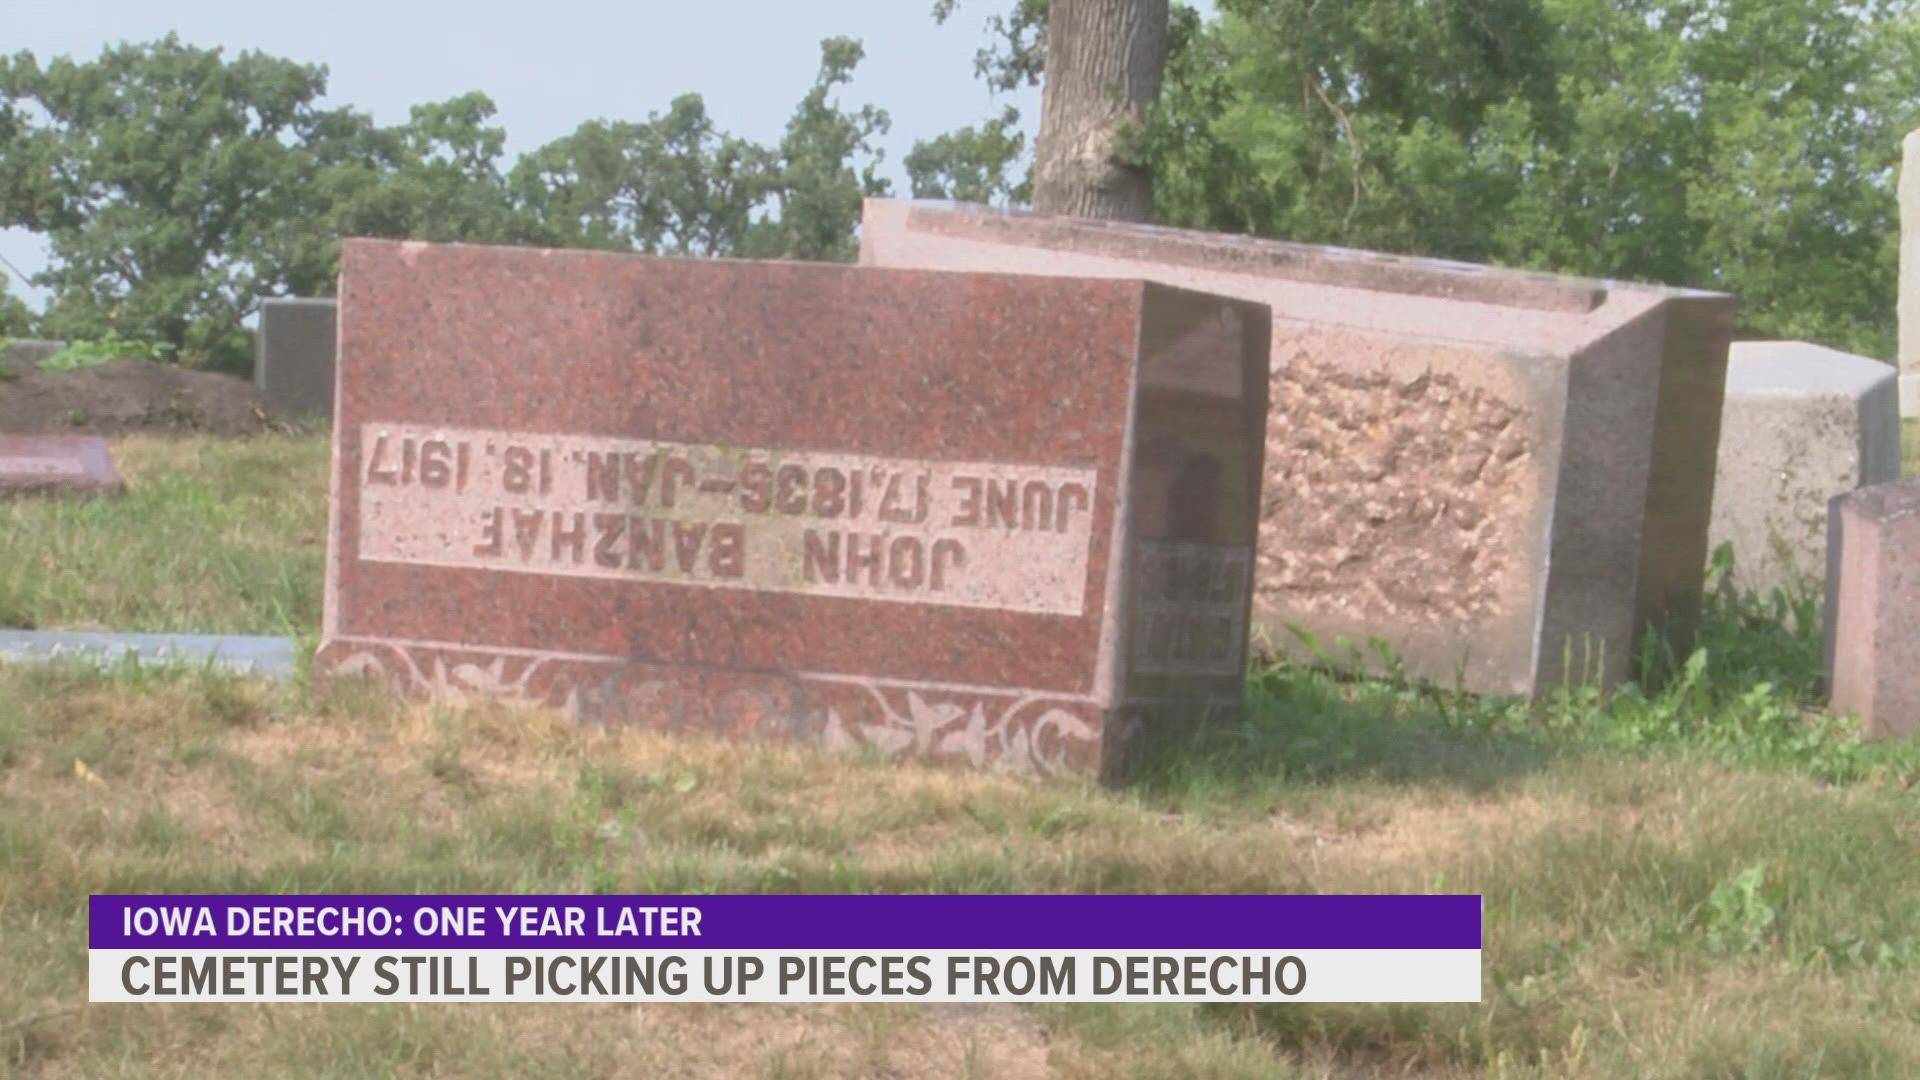 The Riverside Cemetery was left in shambles last year, and the clean-up still continues to this day.